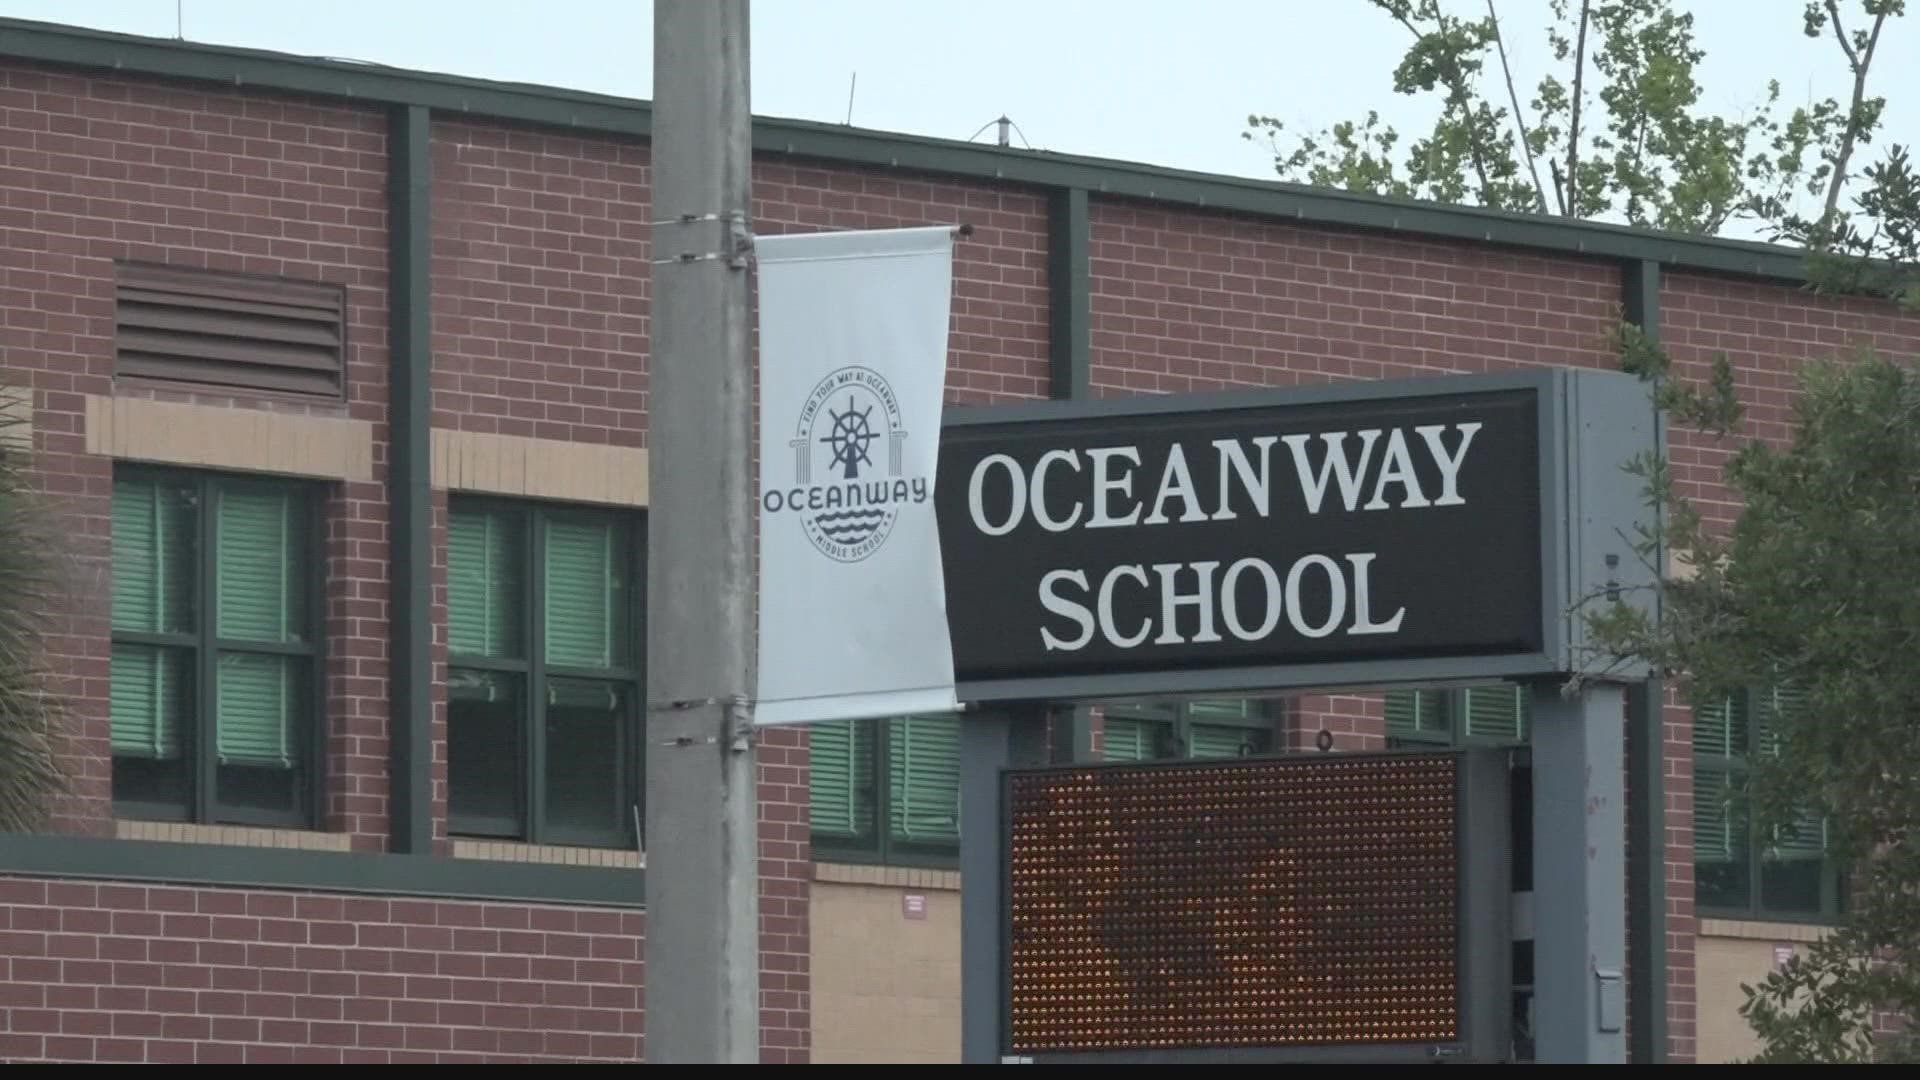 Levi Boone said his daughter has been a target of bullies at Oceanway Middle School for three months.